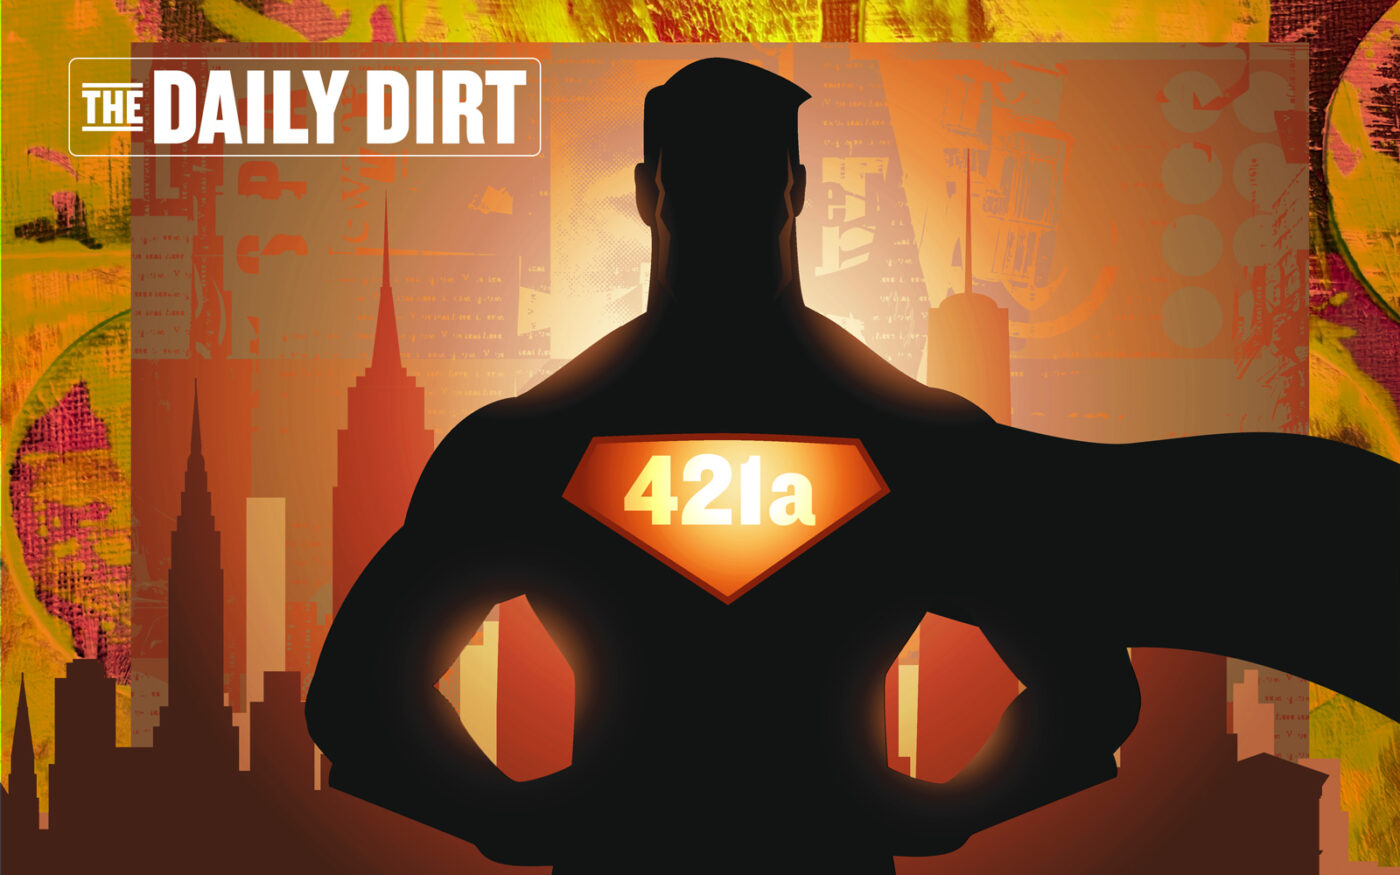 Mayor Adams Launches 421a Task Force: The Daily Dirt